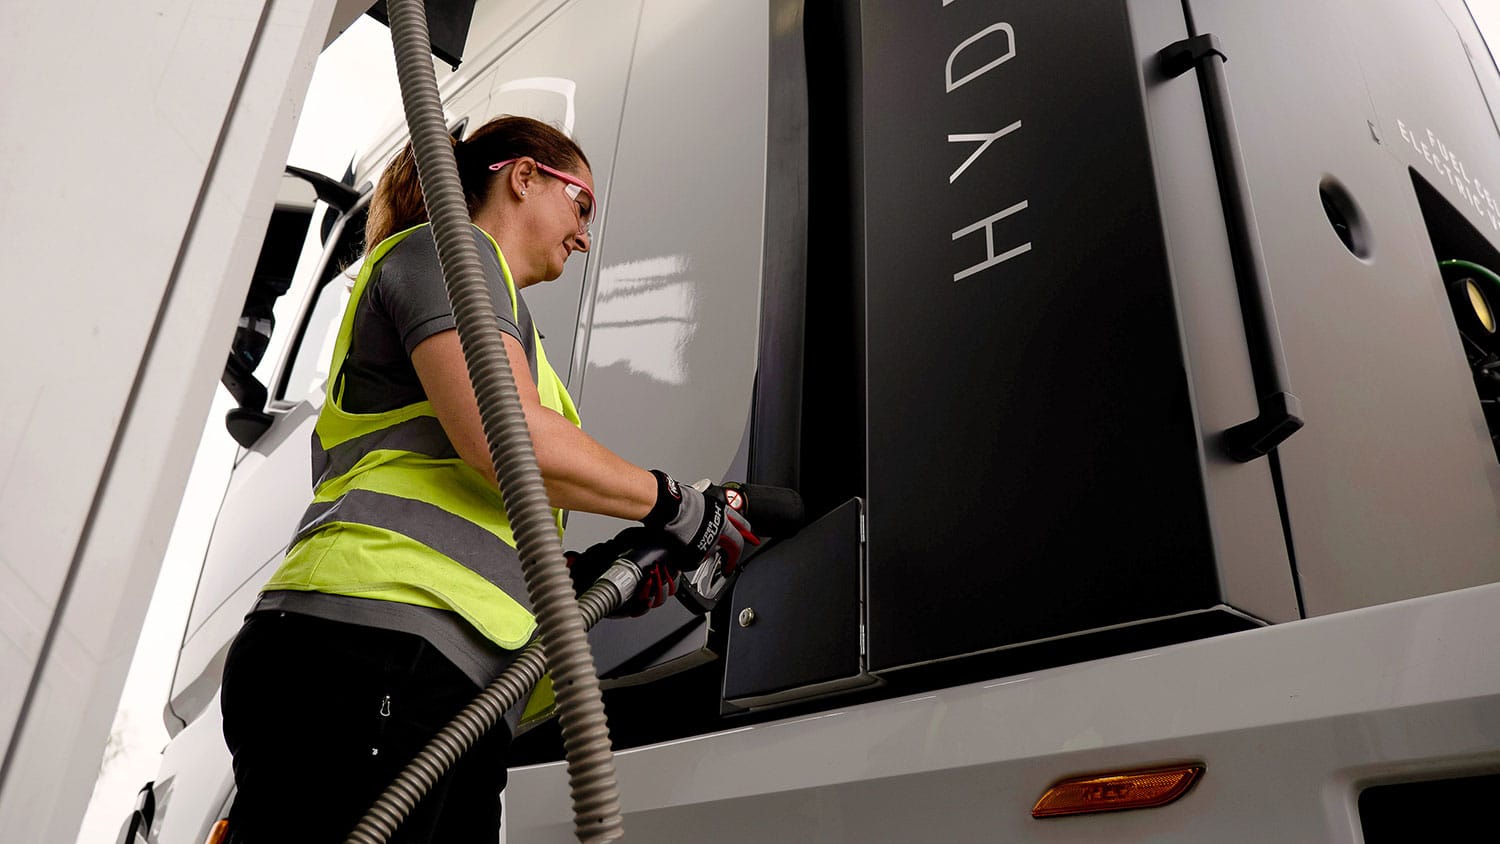 E.ON and Nikola join forces to decarbonize heavy-duty trucking.